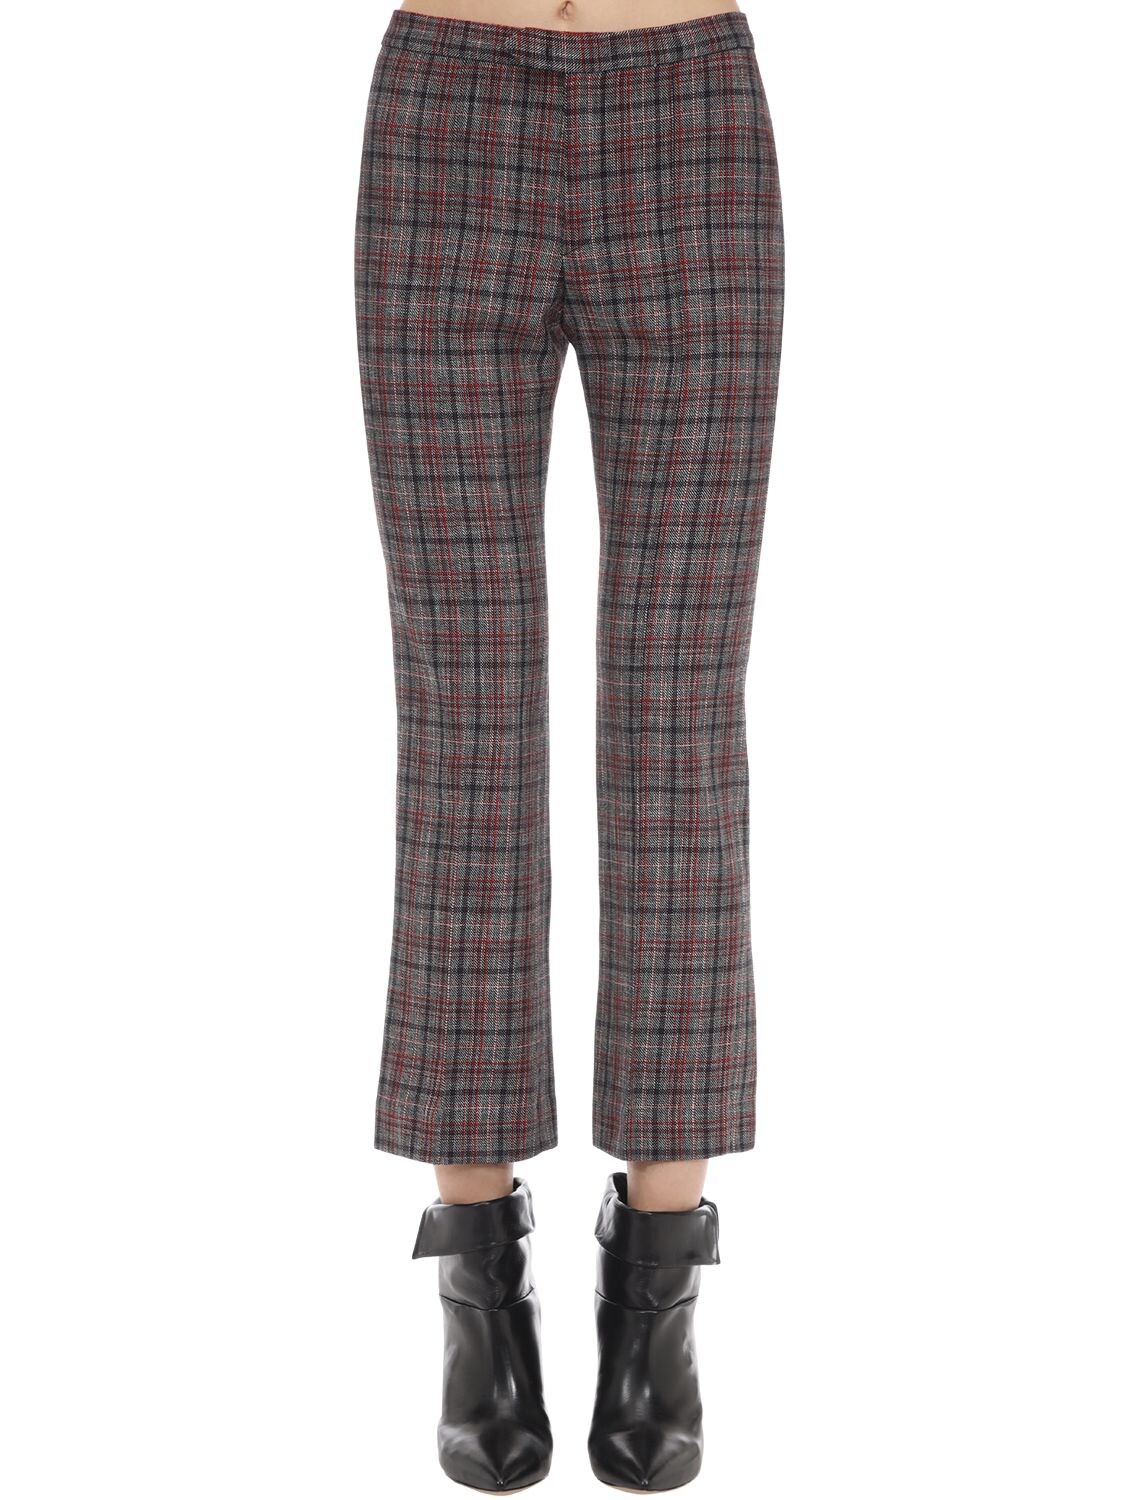 ISABEL MARANT DERYS CHECK WOOL BLEND BOOT CUT trousers,70I1JT014-UKRCSW2